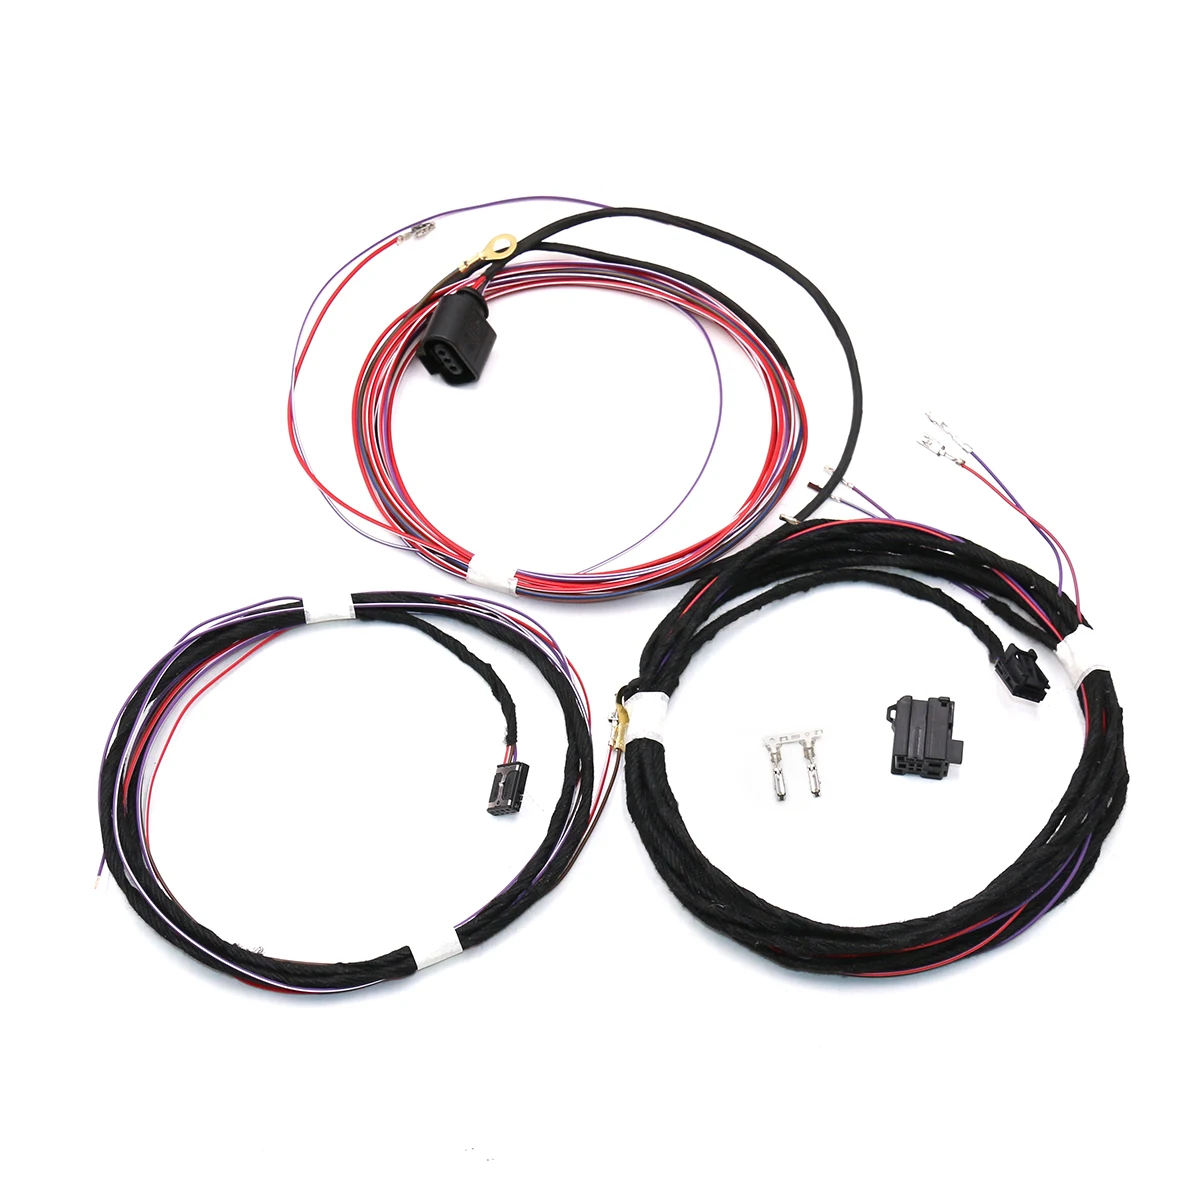 FOR VW Passat B7 CC  Interior monitoring Alarm alarm Siren Speaker Horn Switch Harness cable Wire